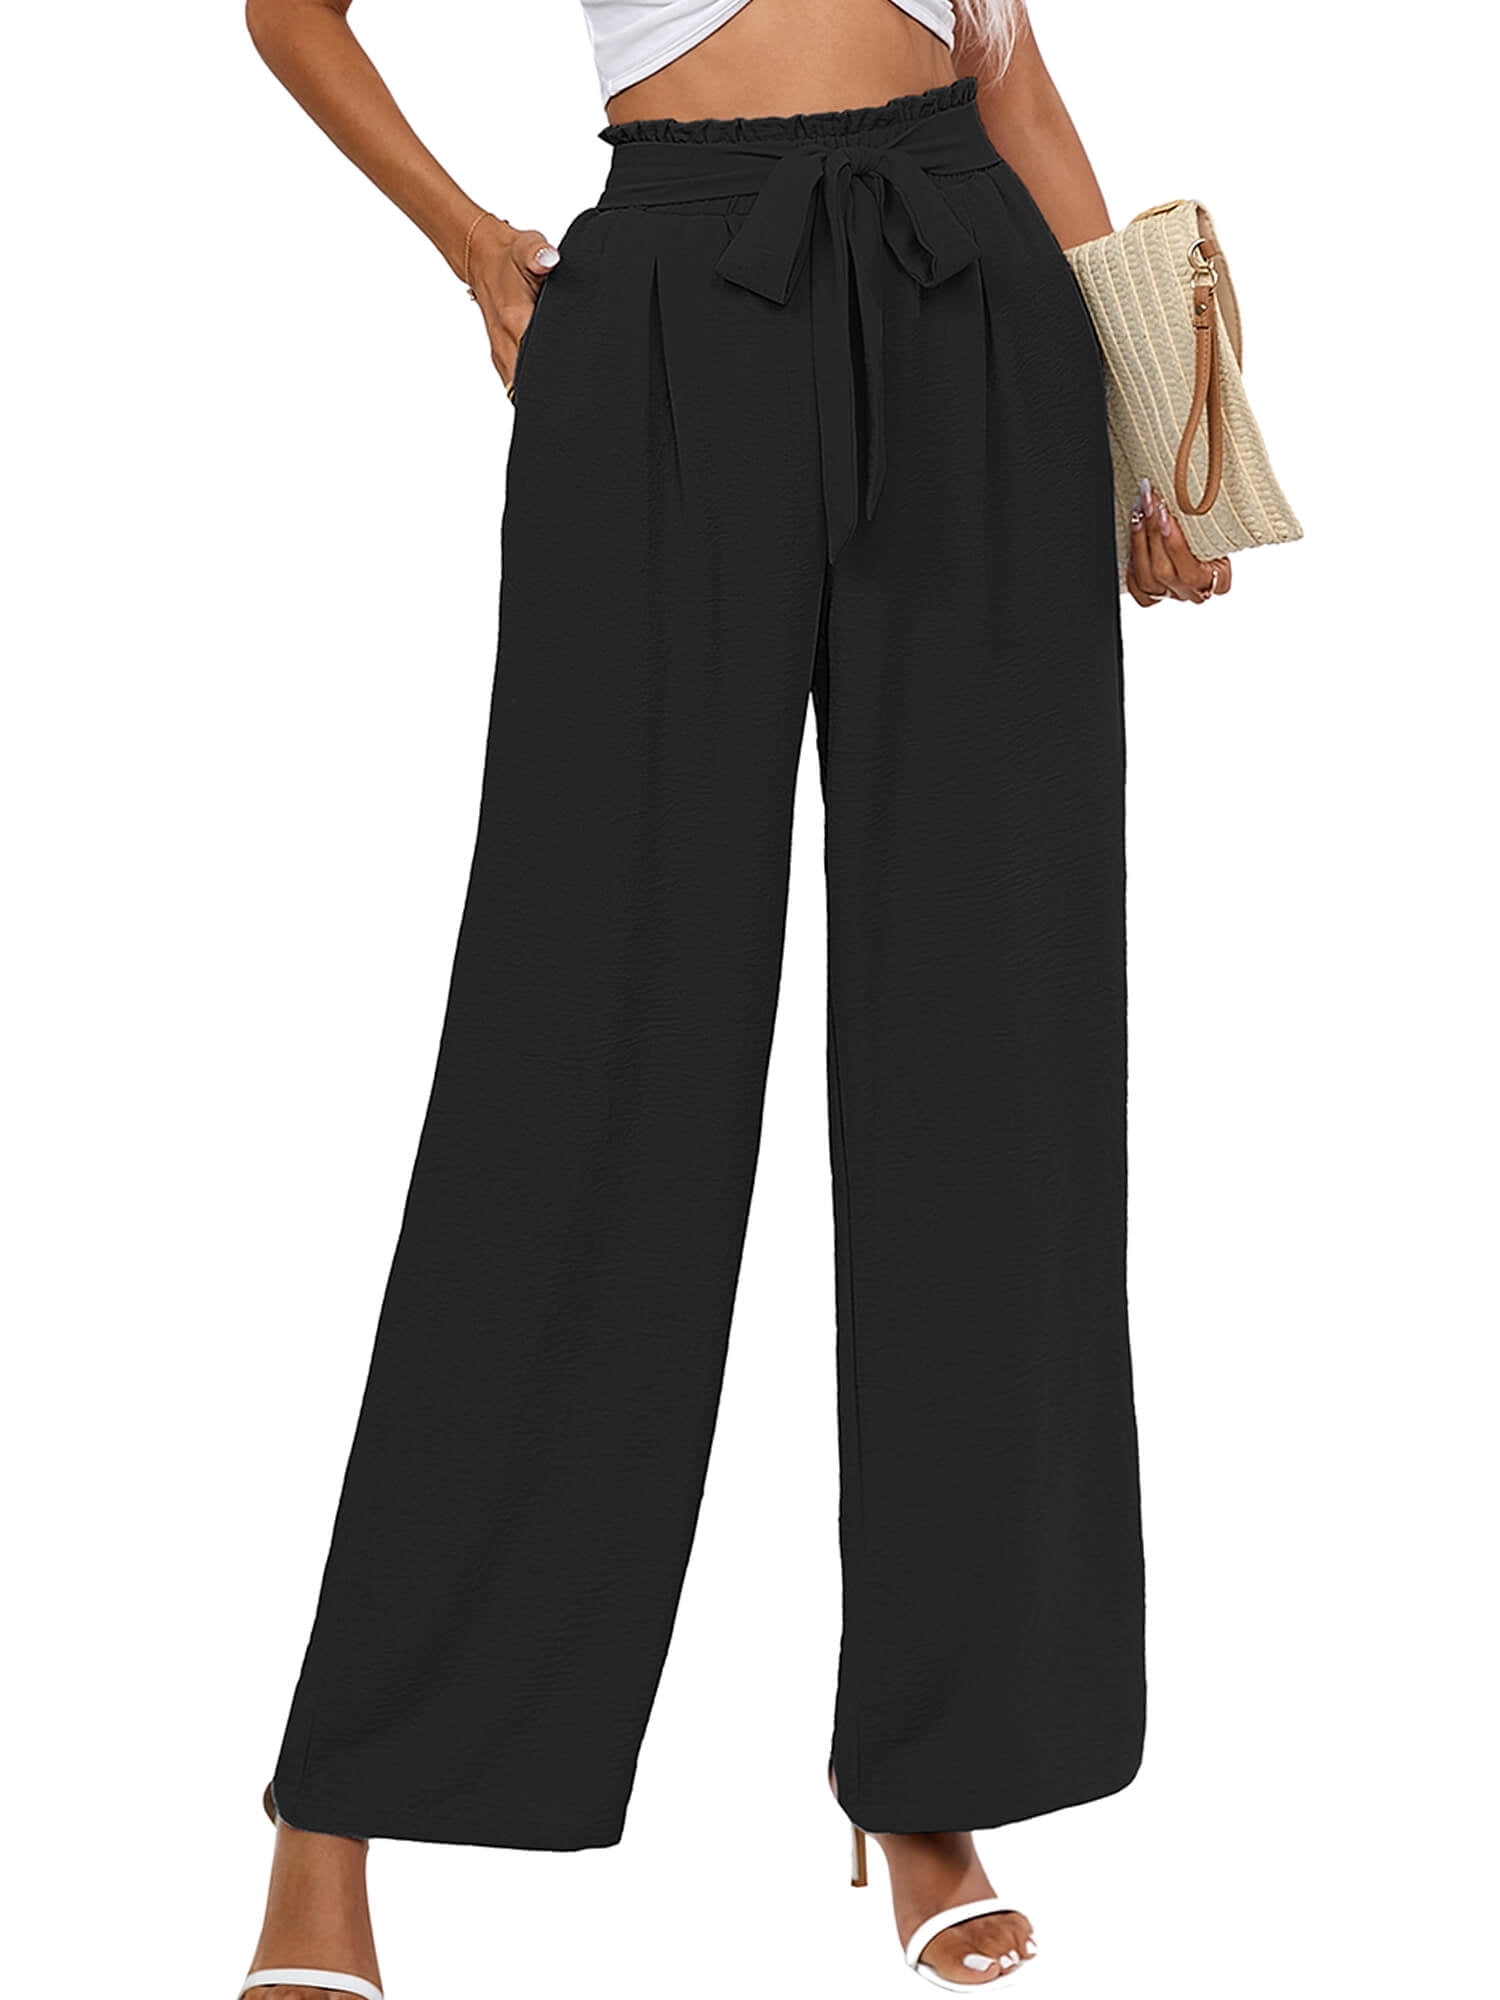 Chiclily Women's Wide Leg Lounge Pants with Pockets Lightweight High  Waisted Adjustable Tie Knot Loose Trousers, US Size Medium in Black 